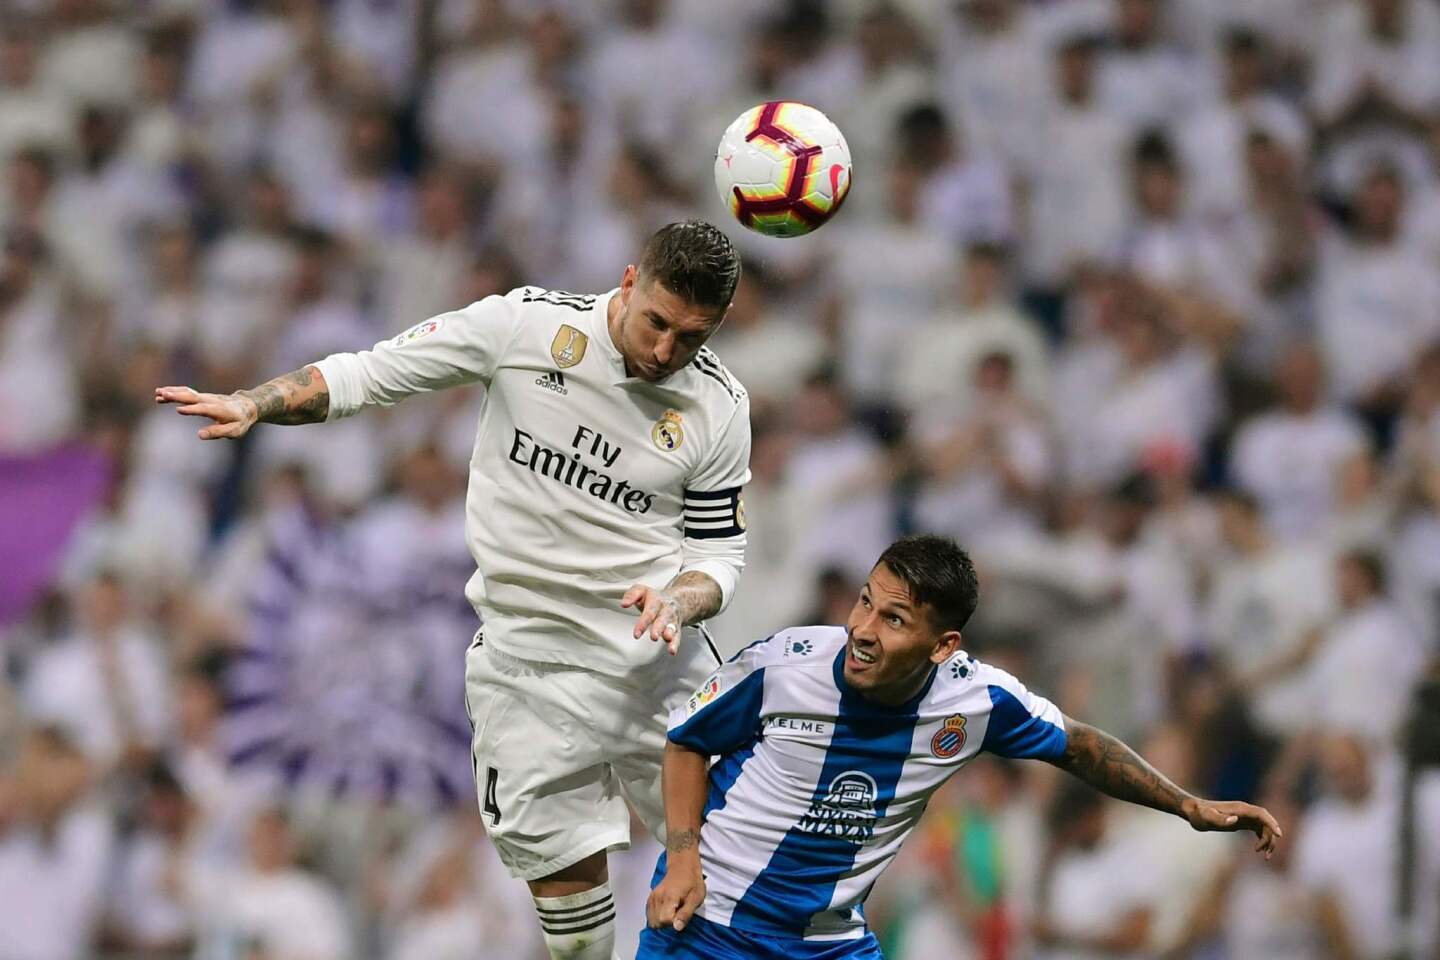 Real Madrid's Spanish defender Sergio Ramos (L) jumps for the ball next to Espanyol's Paraguayan forward Hernán Perez during the Spanish league football match between Real Madrid CF and RCD Espanyol at the Santiago Bernabeu stadium in Madrid on September 22, 2018. (Photo by JAVIER SORIANO / AFP)JAVIER SORIANO/AFP/Getty Images ** OUTS - ELSENT, FPG, CM - OUTS * NM, PH, VA if sourced by CT, LA or MoD **